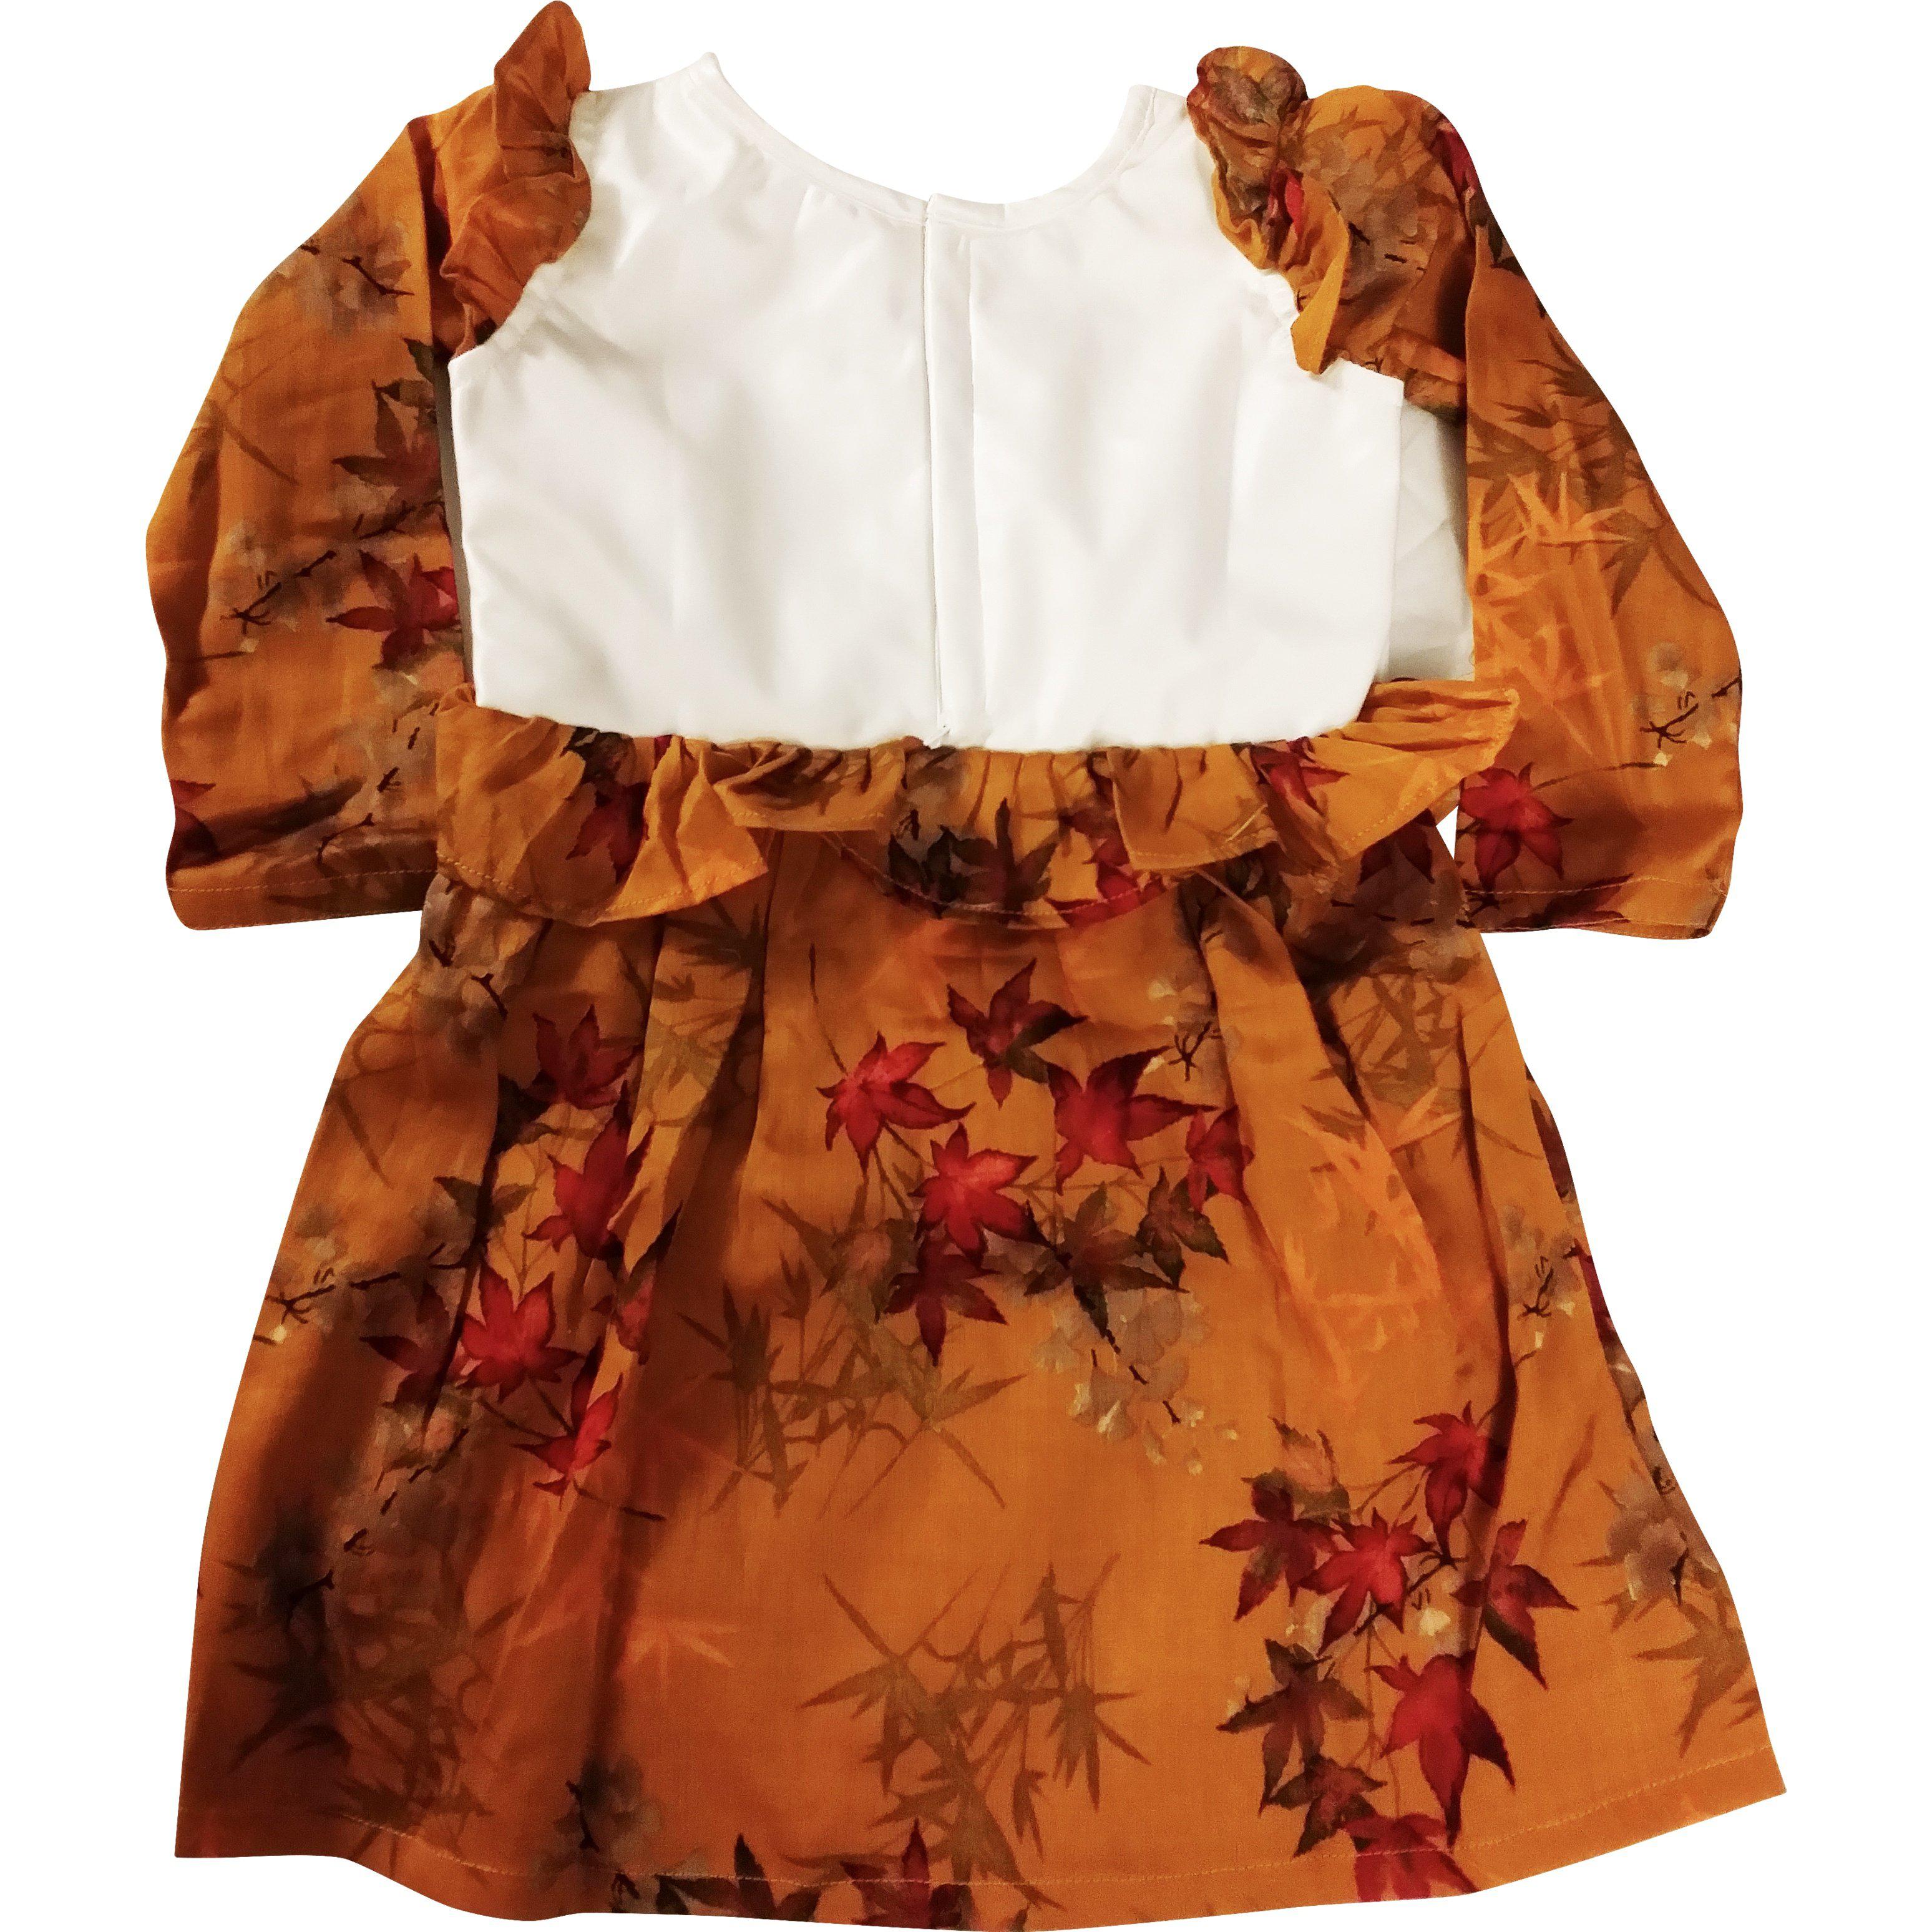 Tawny Brown Stain-Proof Toddler Printed Floral  Dress - Snug Bub USA